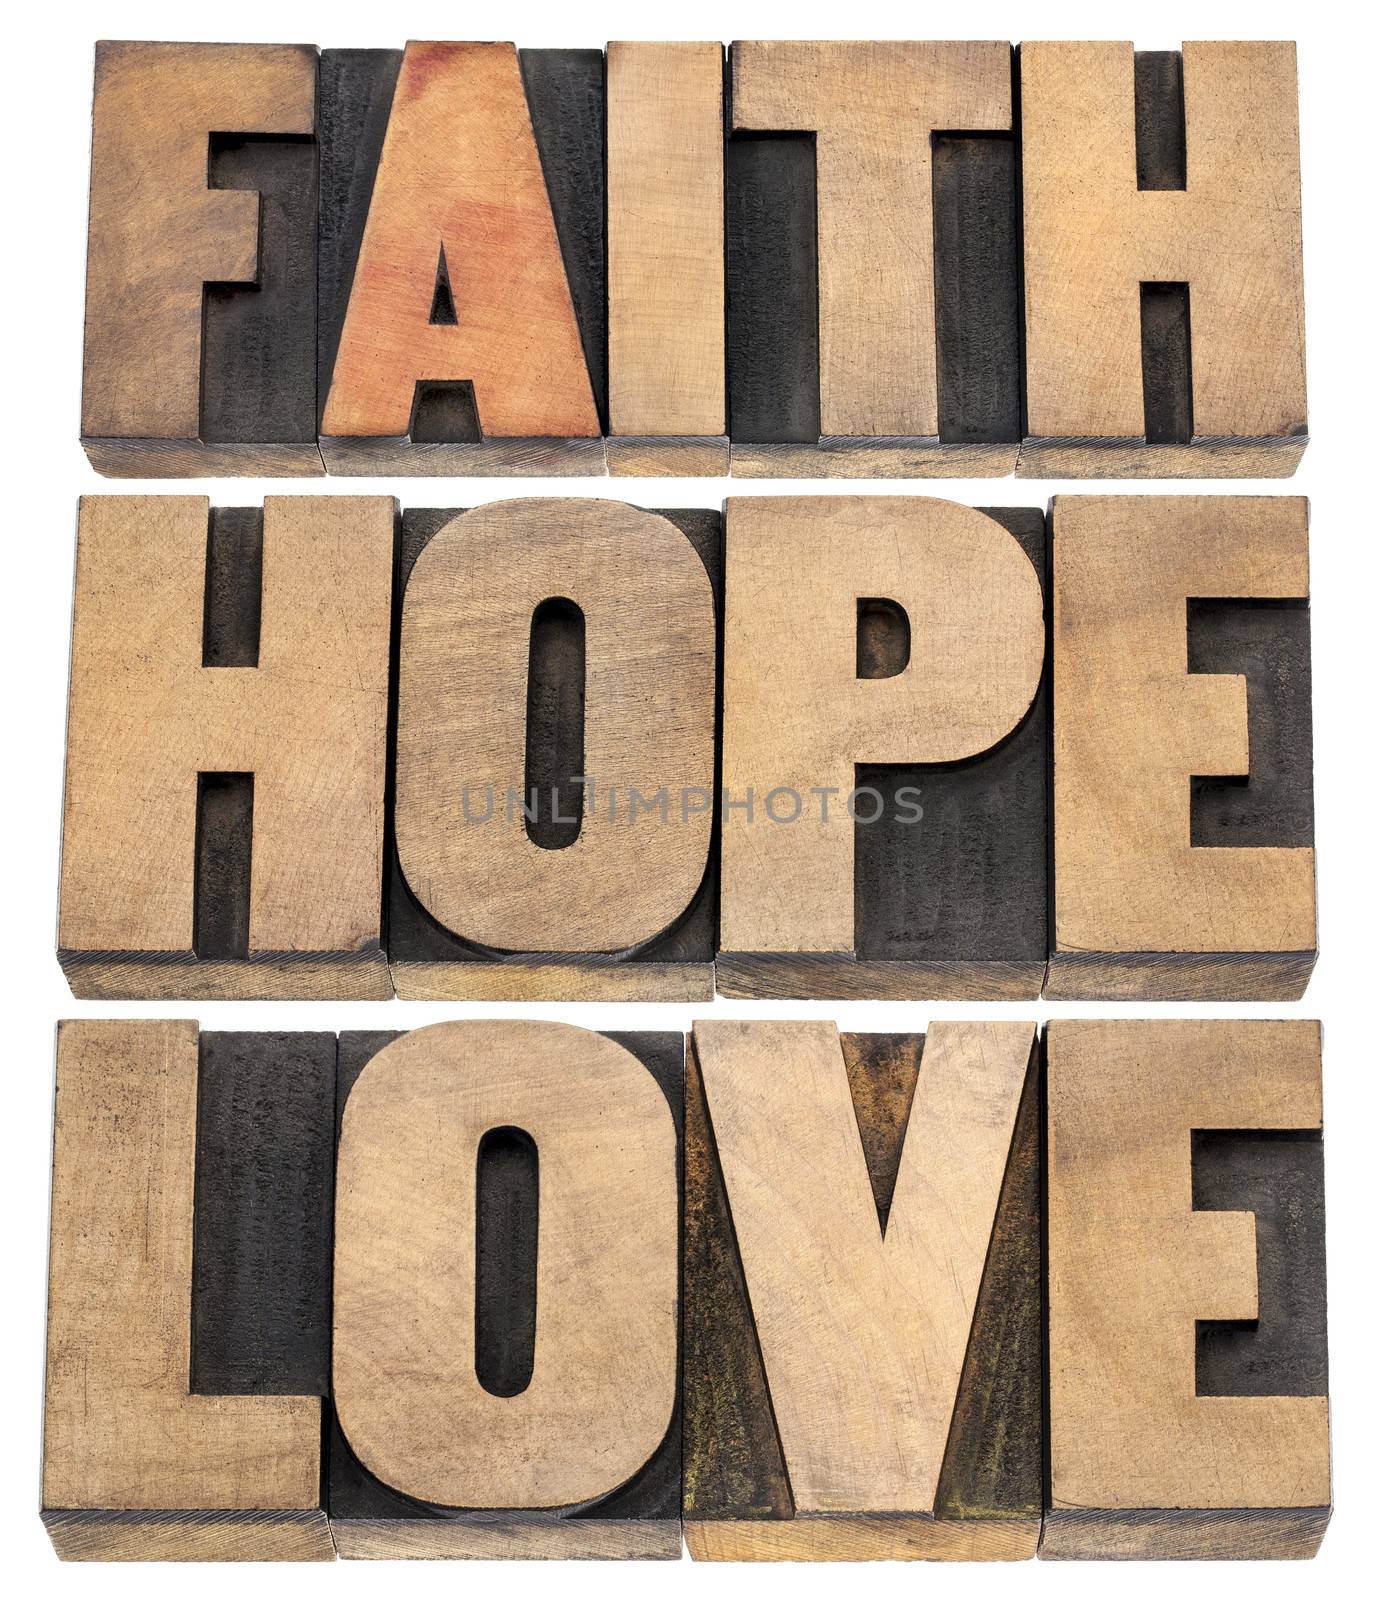 faith, hope and love - a collage of isolated words in vintage letterpress wood type